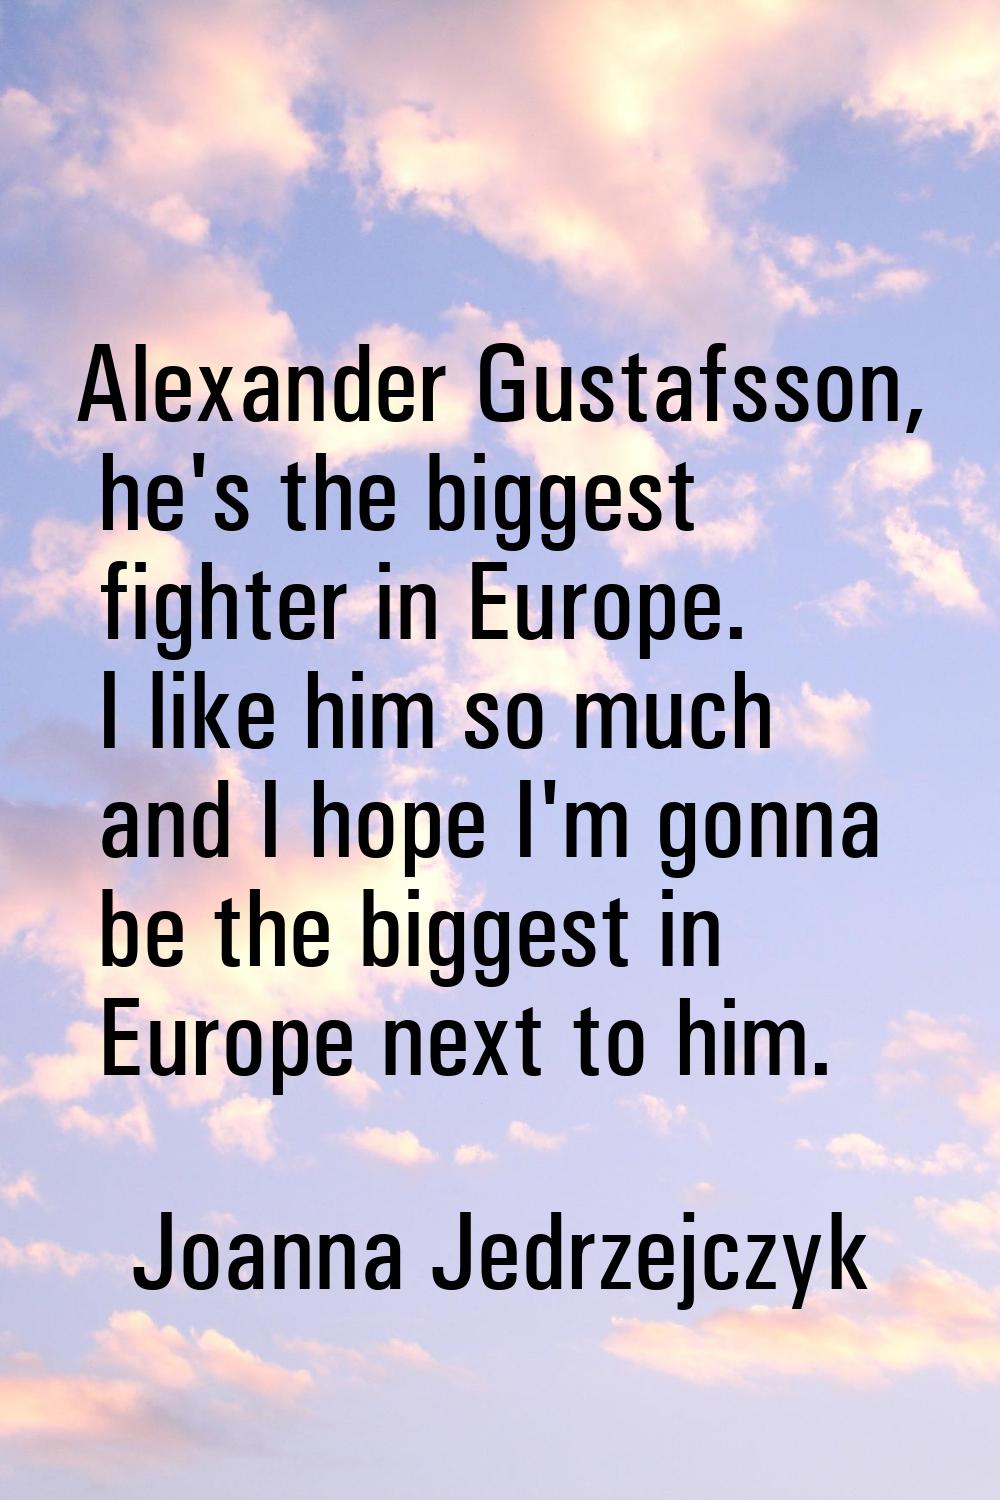 Alexander Gustafsson, he's the biggest fighter in Europe. I like him so much and I hope I'm gonna b